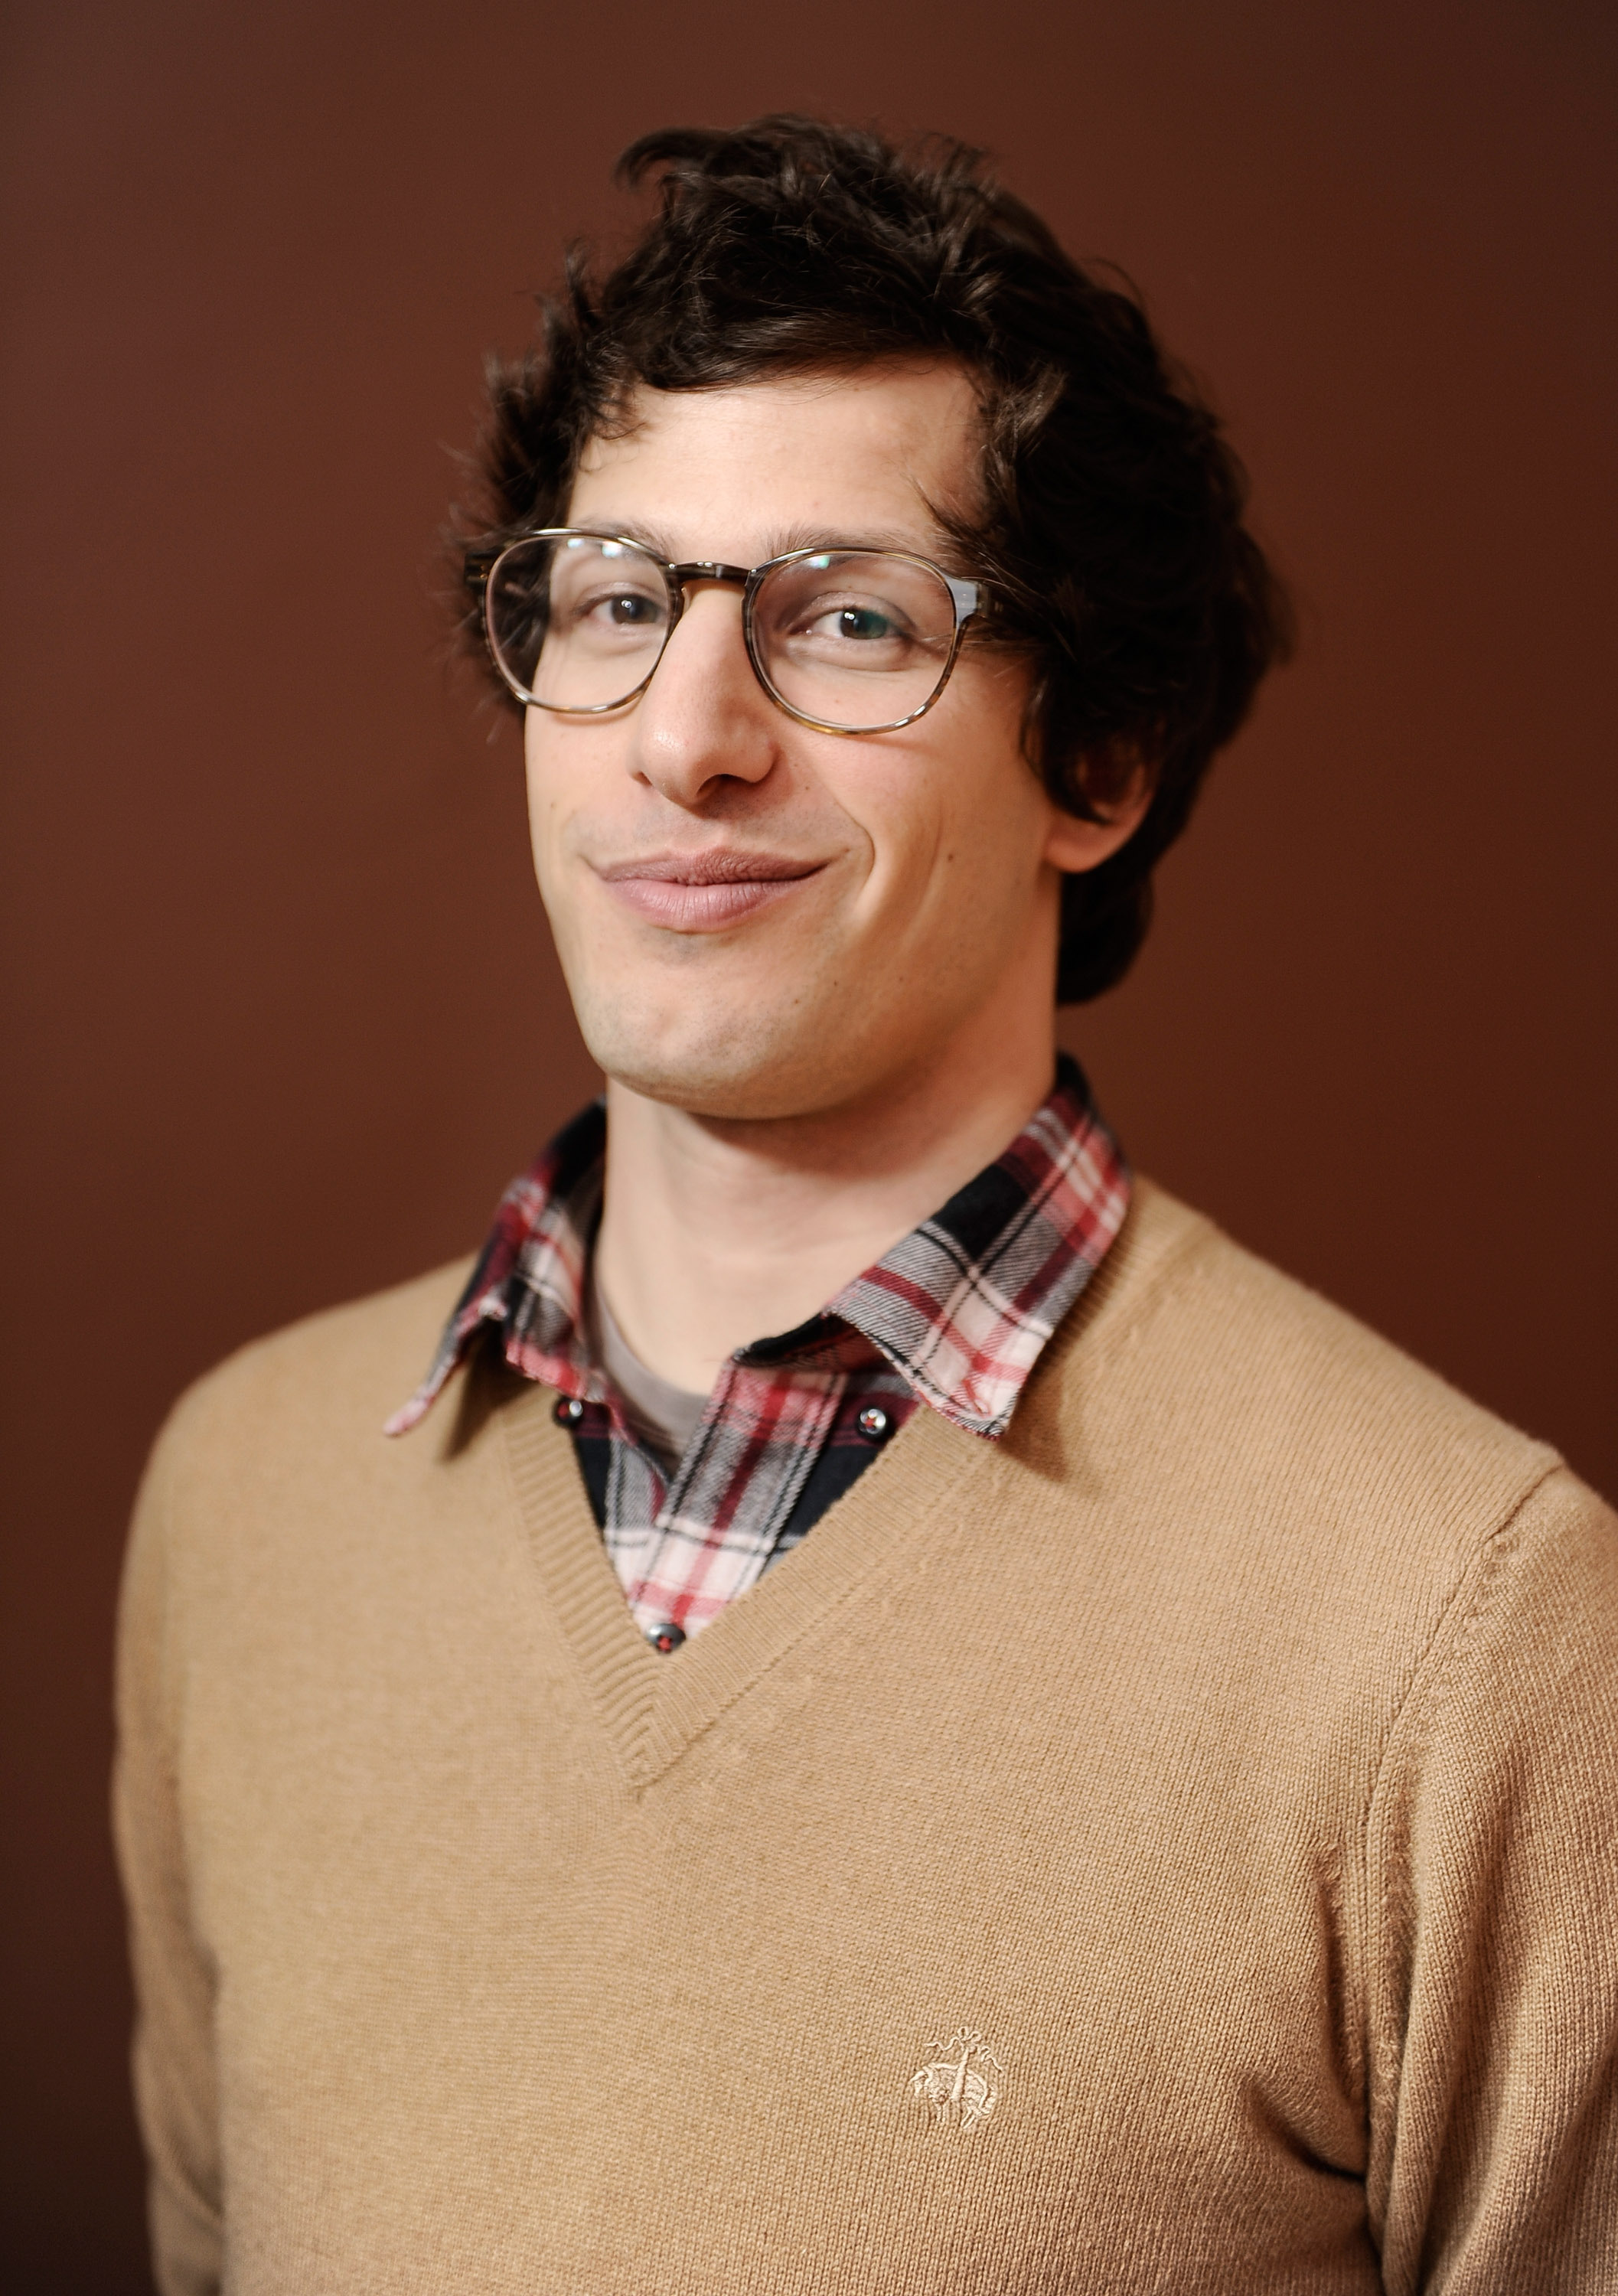 Andy Samberg Backgrounds, Compatible - PC, Mobile, Gadgets| 2114x3000 px